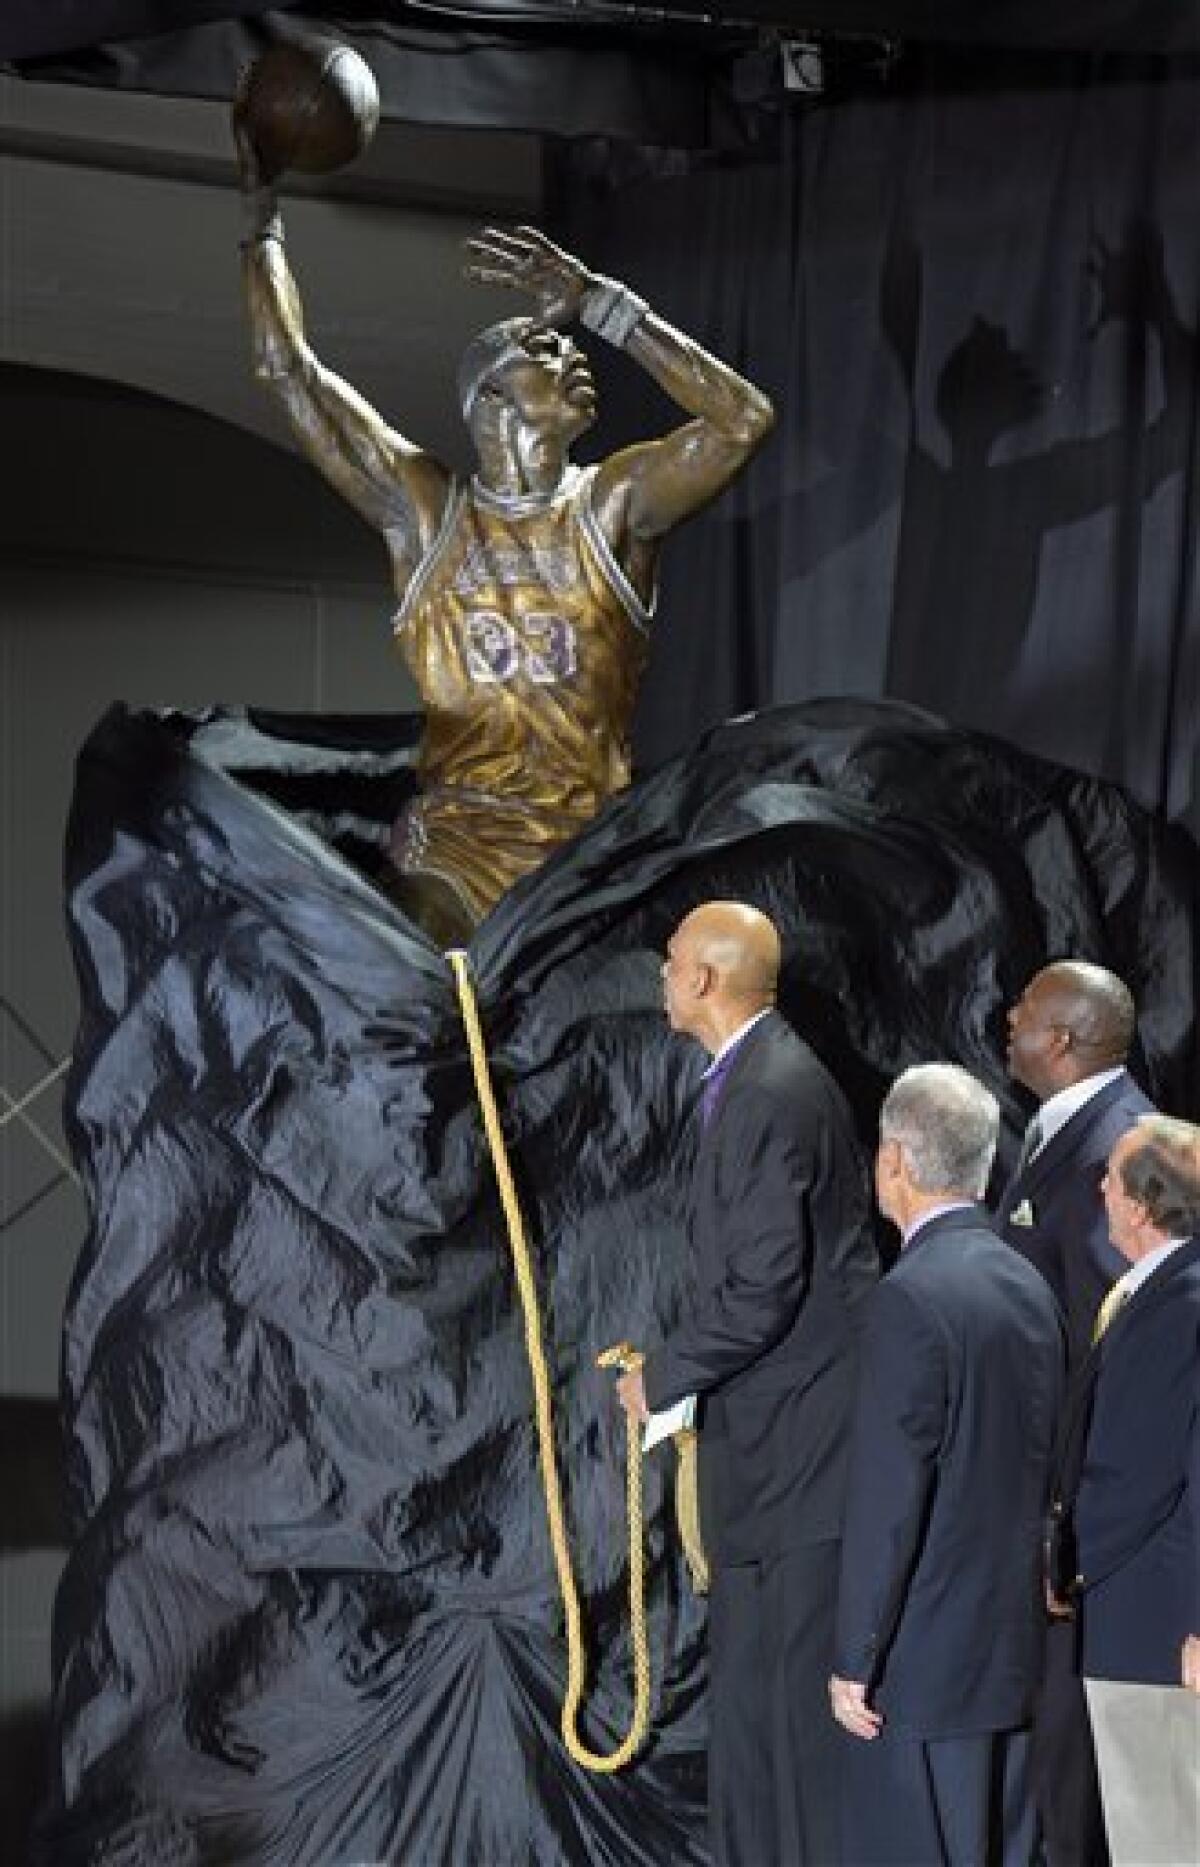 Lakers unveil statue of Elgin Baylor outside Staples Center